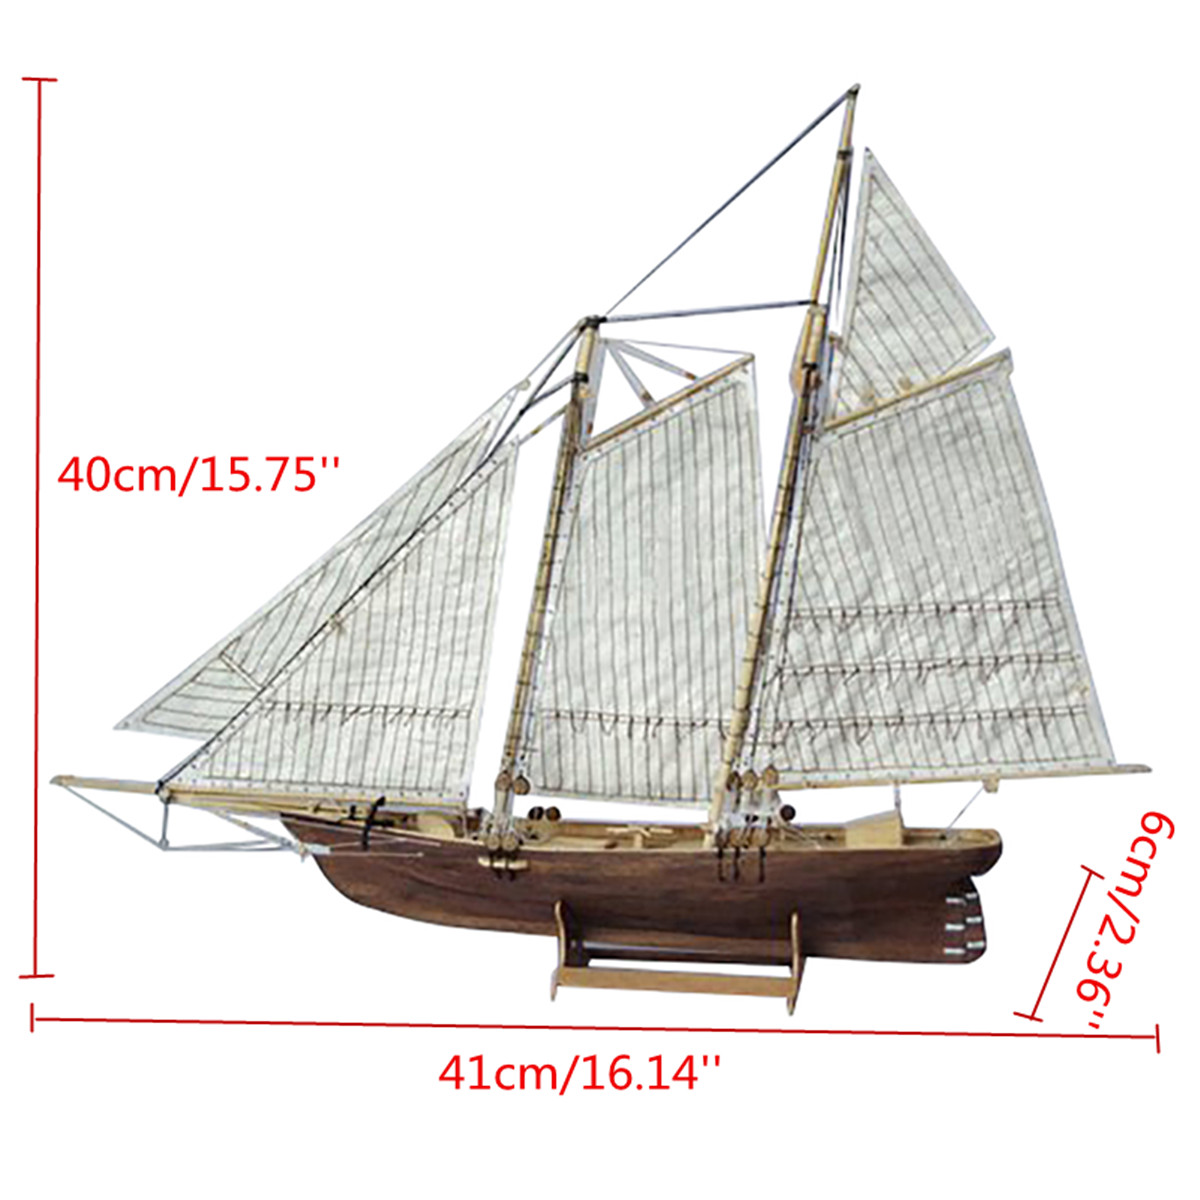 1120-Scale-Wooden-Wood-Sailboat-Ship-Kits-3D-Puzzle-Model-Building-Decoration-Boat-Gift-Toy-1352894